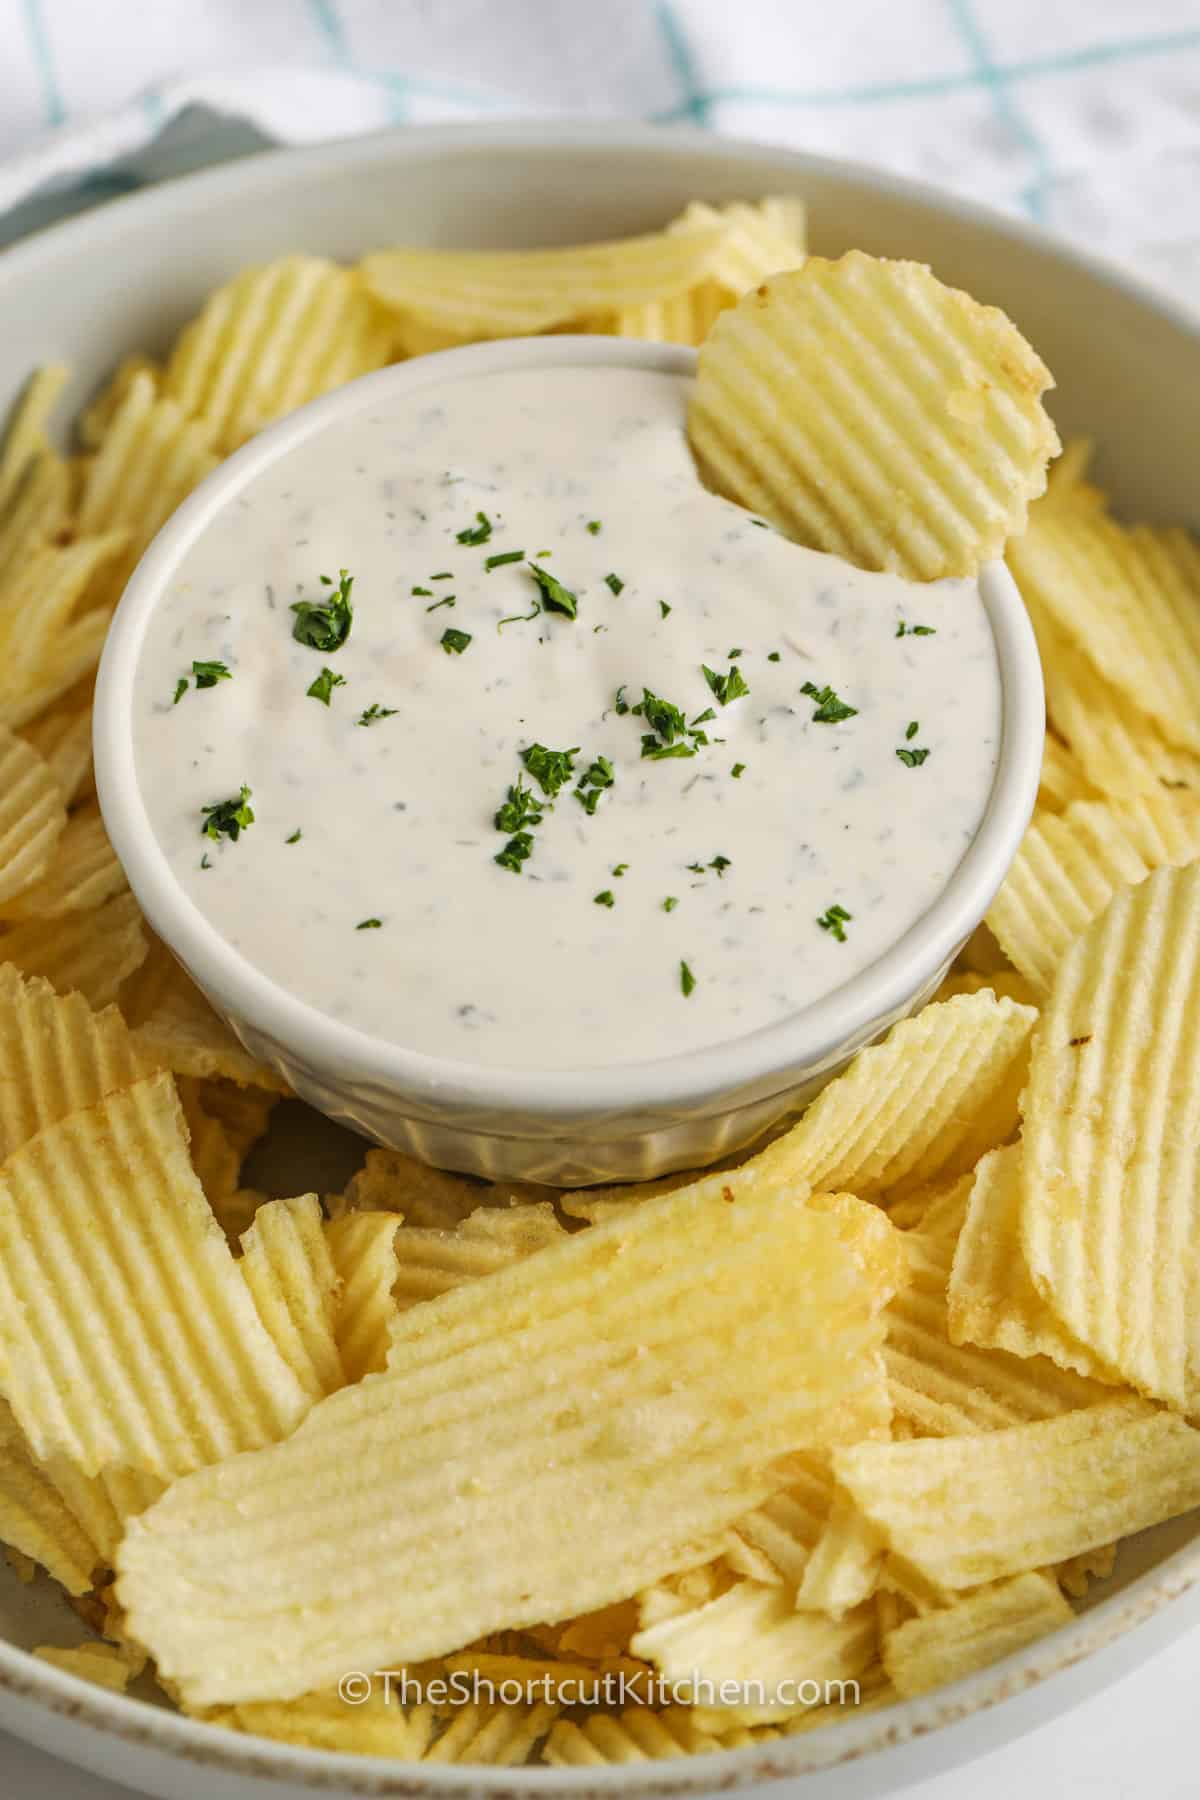 Homemade Chip Dip with chips